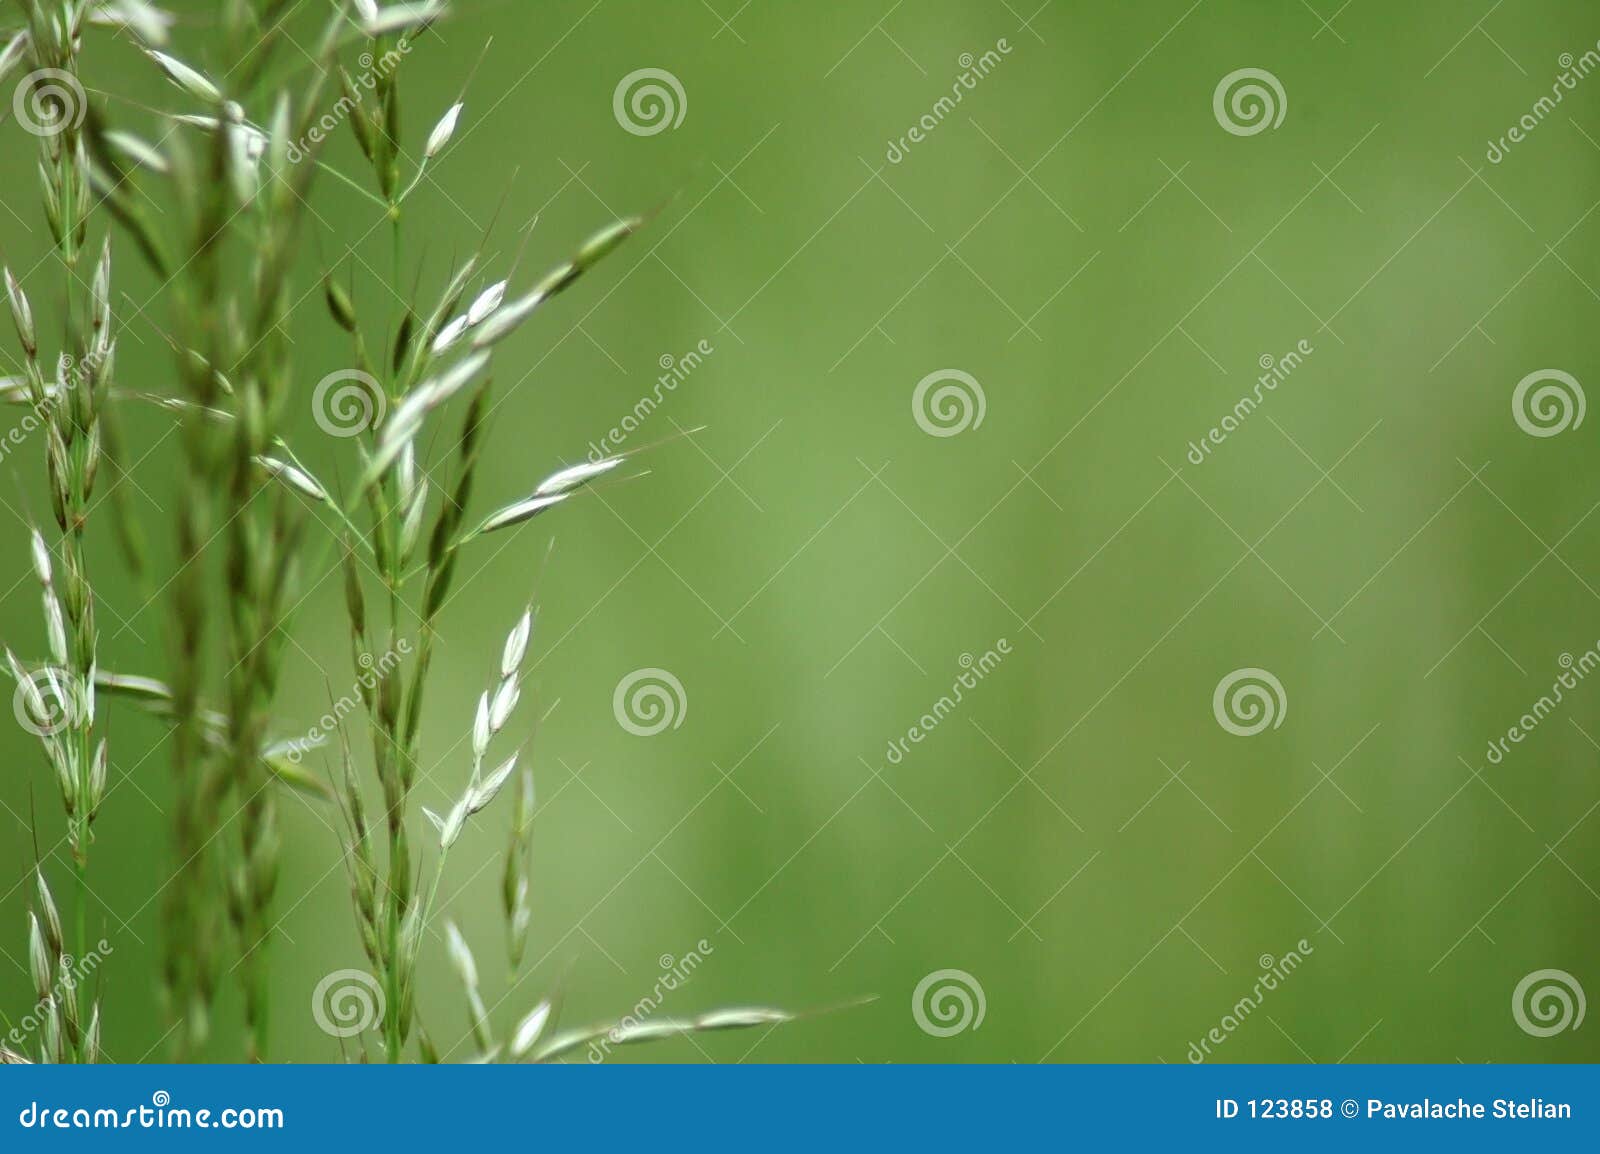 Some grass blades stock photo. Image of meadow, rural, background - 123858